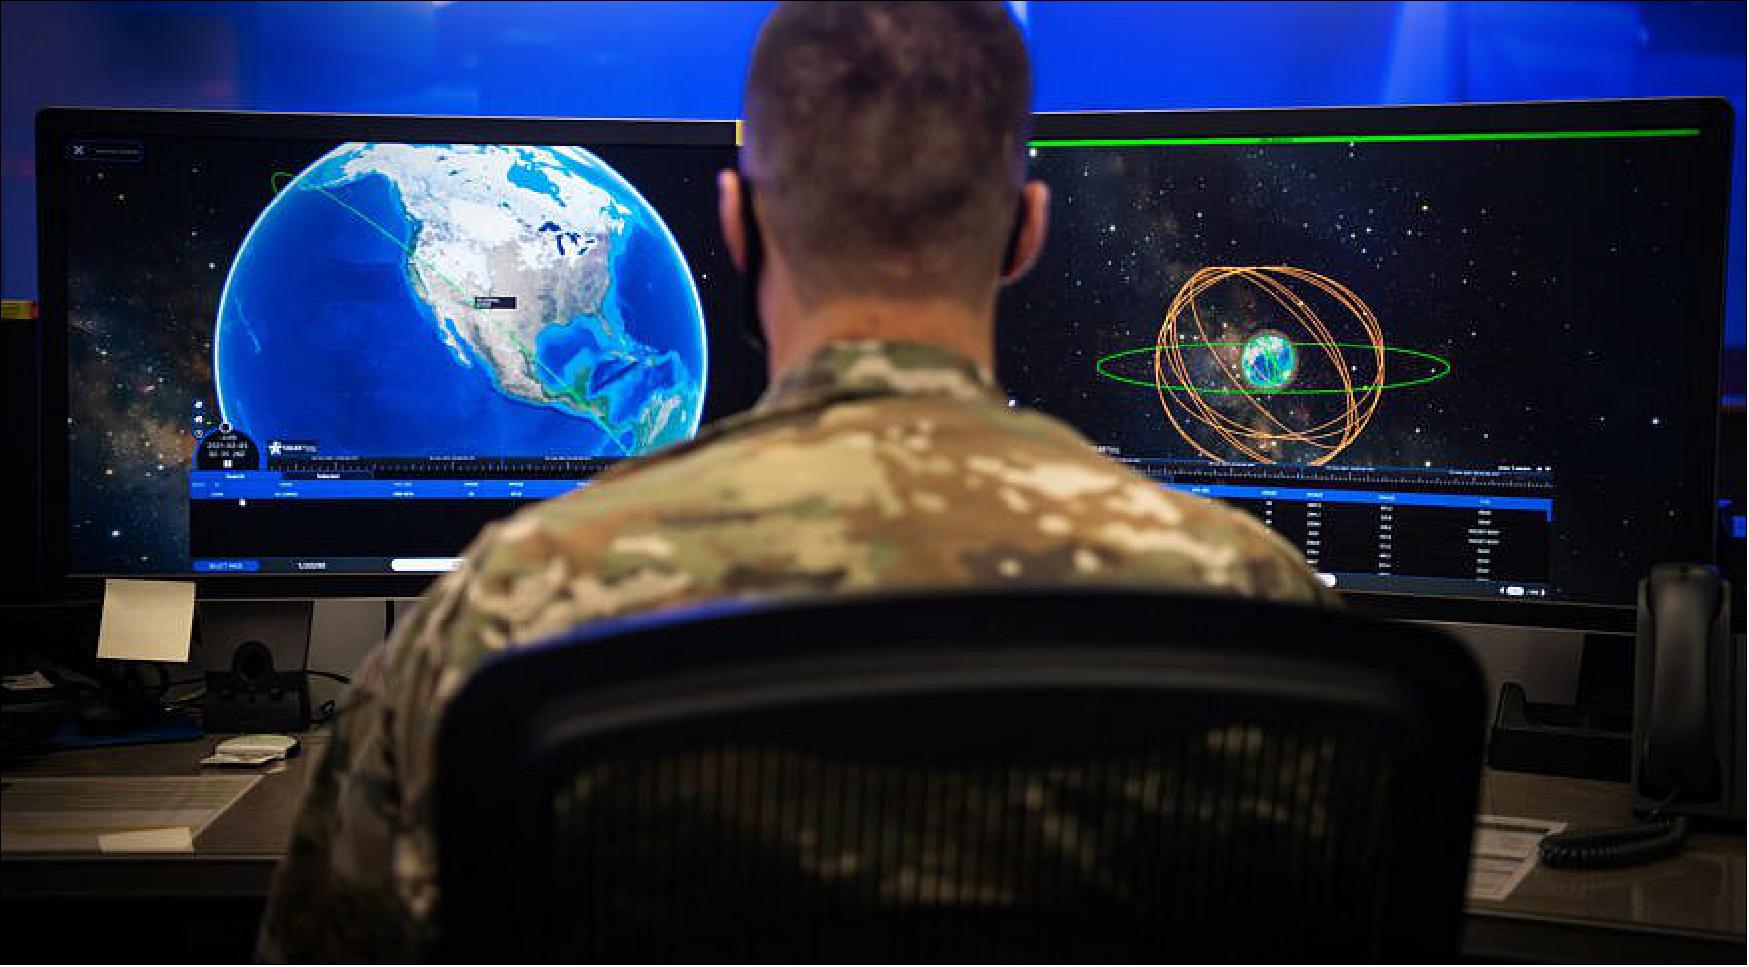 Figure 7: Operations from U.S. Space Command and the intelligence community monitor space threats at the National Space Defense Center at Schriever Air Force Base, Colorado (image credit: U.S. Space Force)